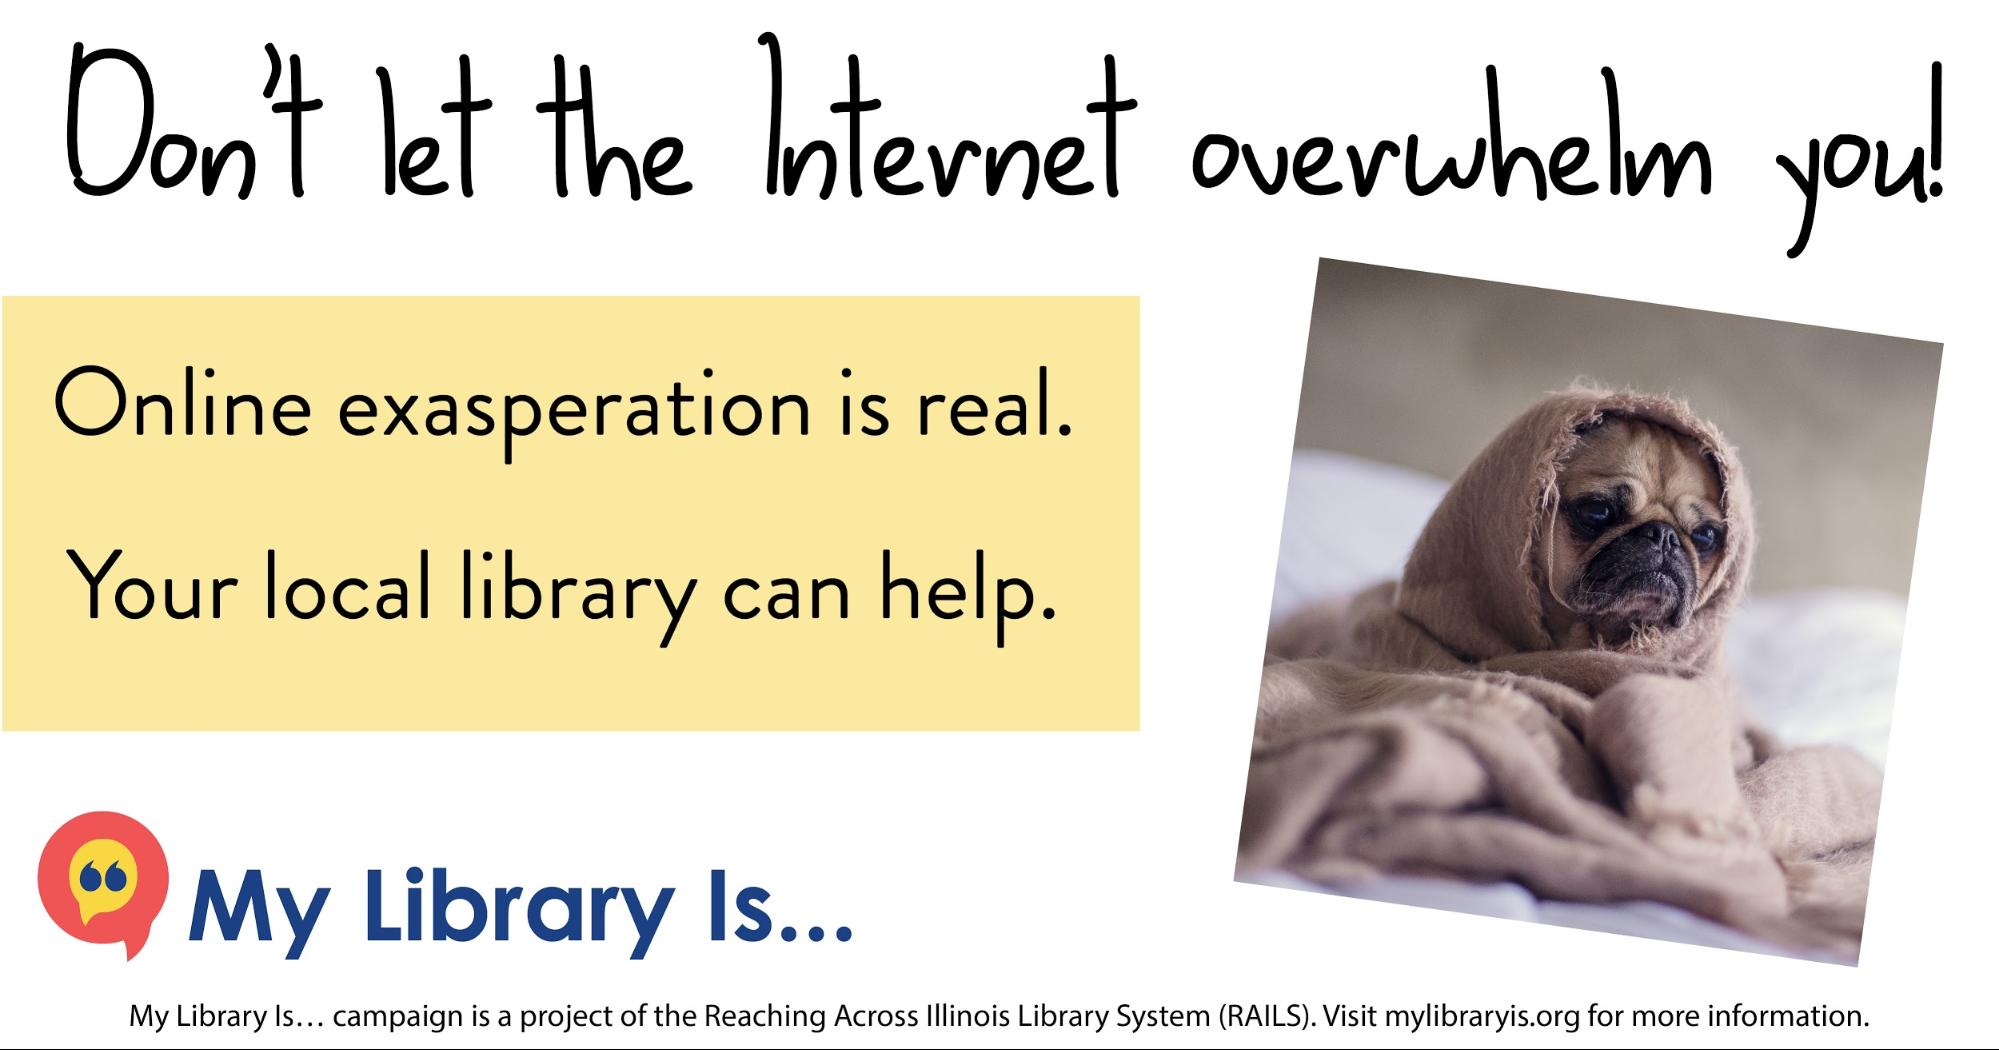 Image for Facebook. "Don't let the Internet overwhelm you! Online exasperation is real. Your local library can help." Footer provides mylibraryis.org URL.